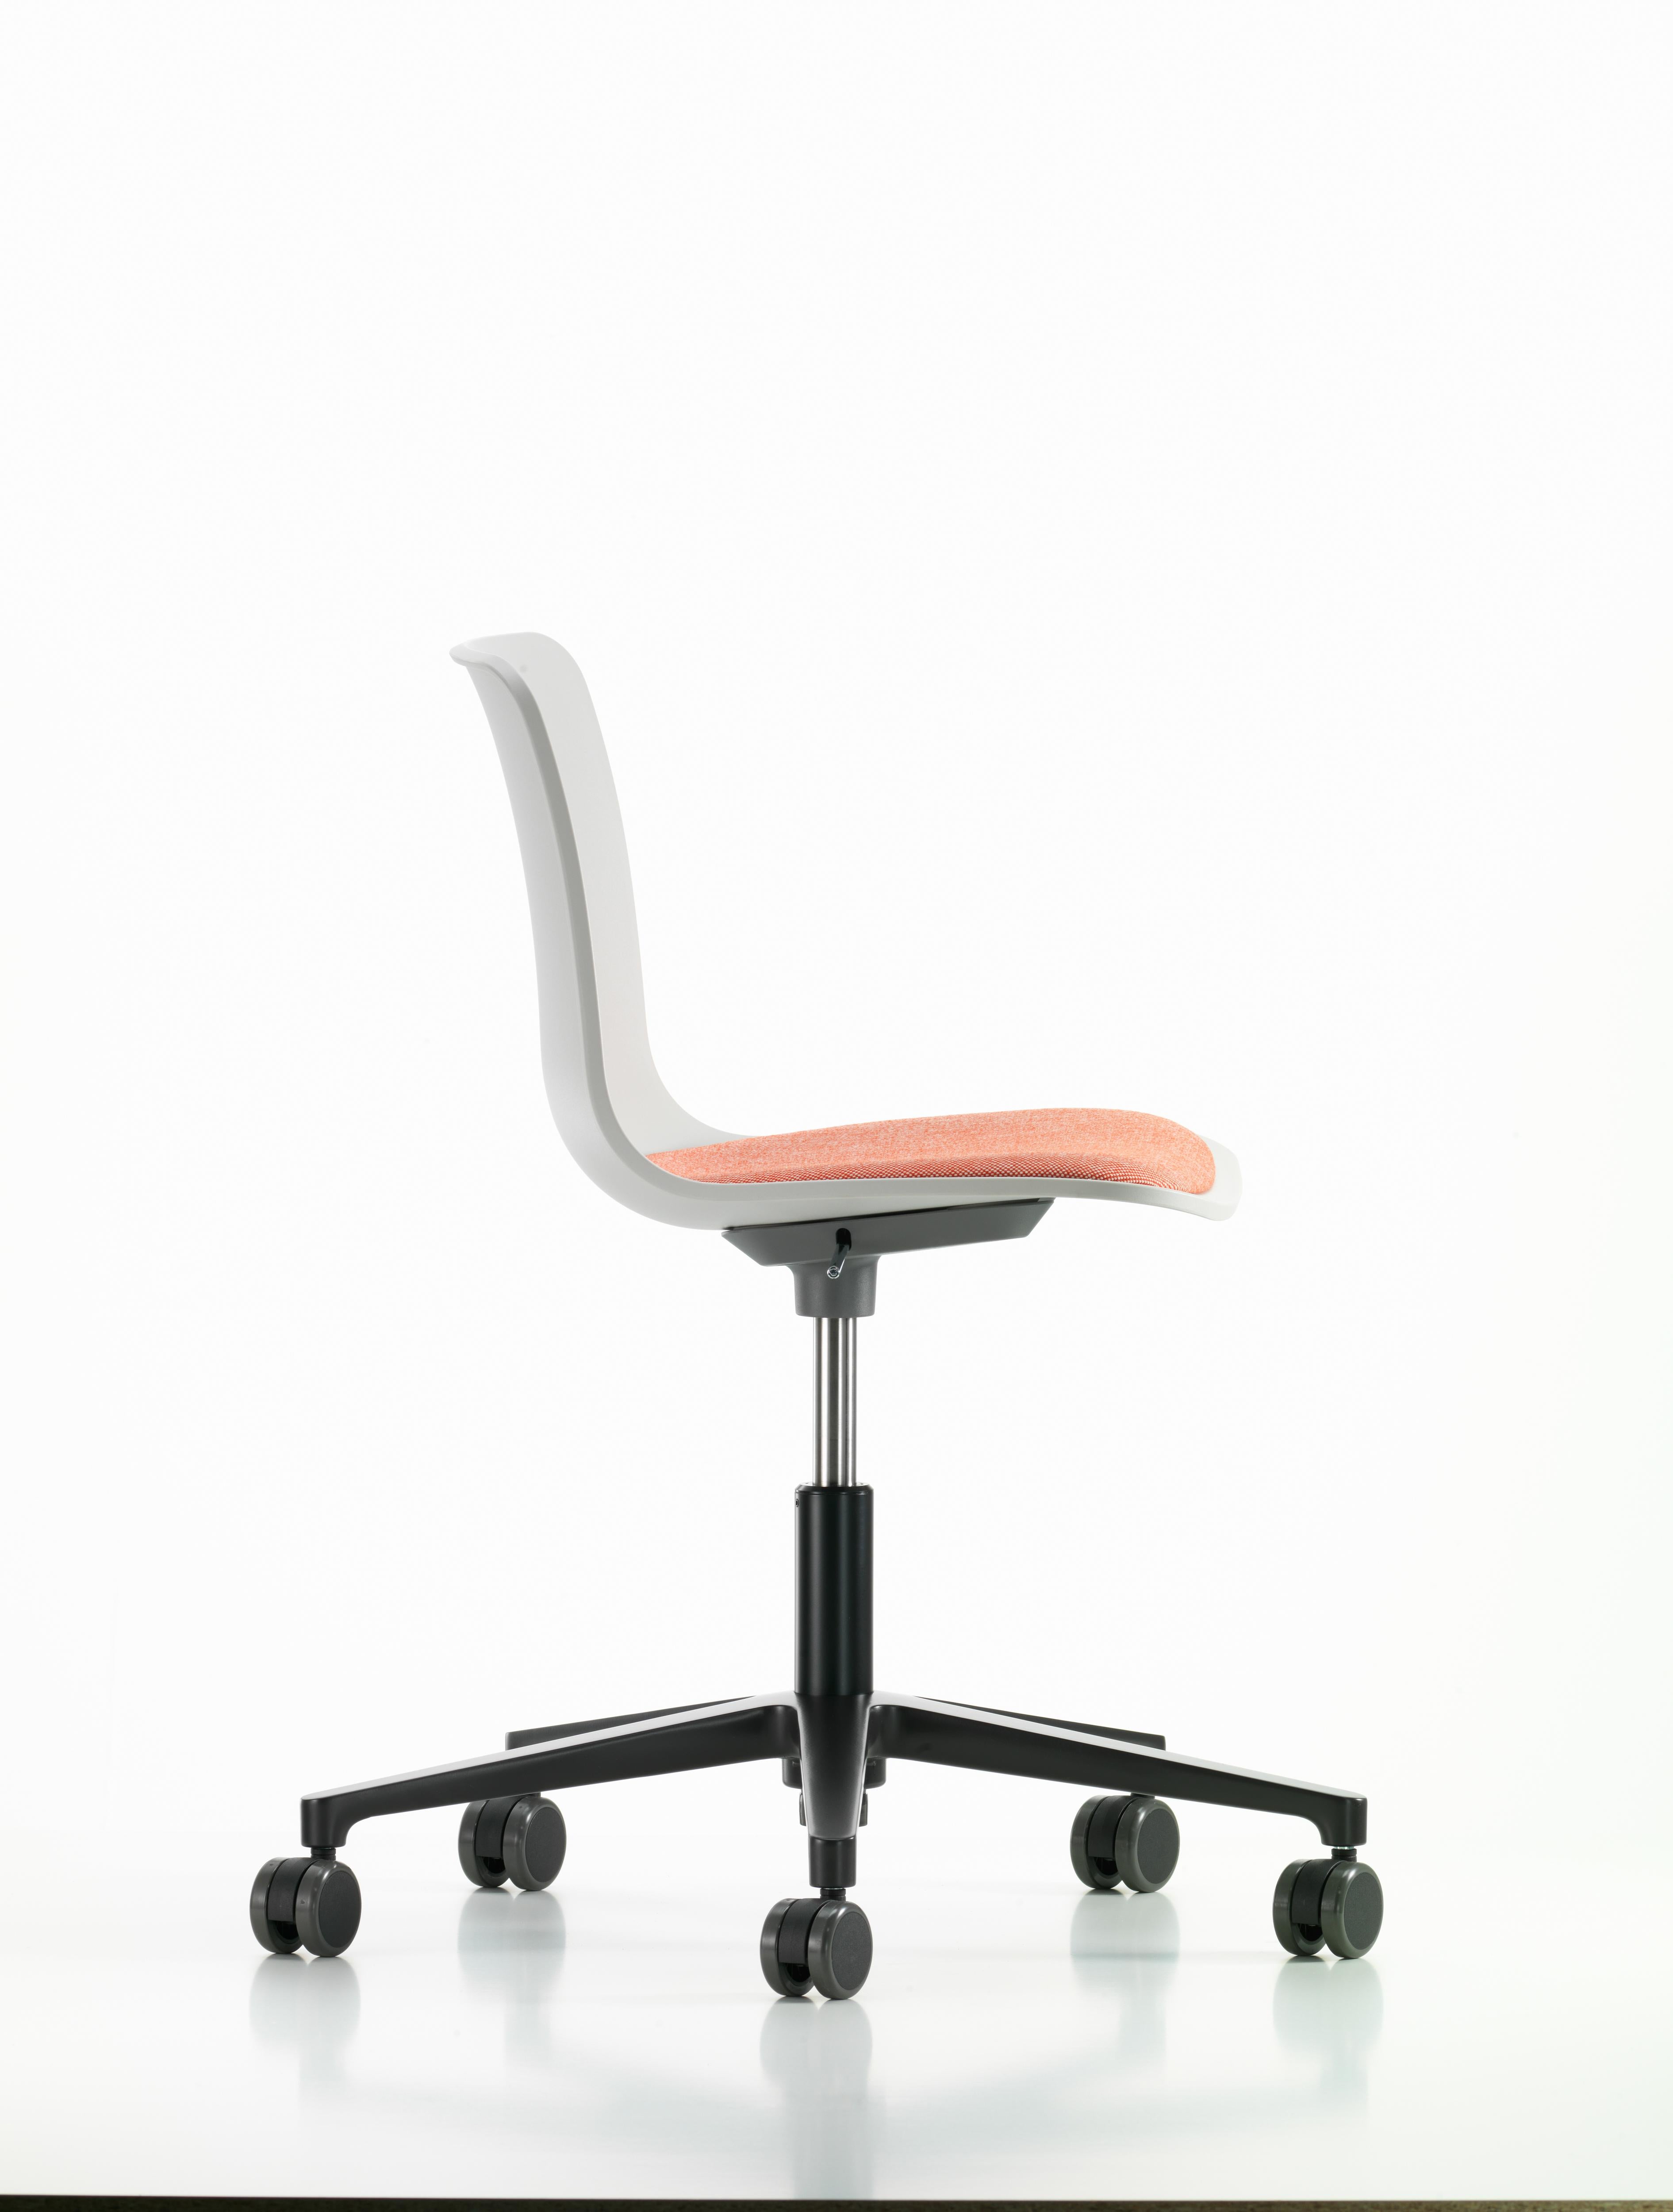 These products are only available in the United States.

The HAL Studio swivel chair belongs to the HAL family of chairs by Jasper Morrison and is ideal for use in home offices. It offers shock-absorbing seat suspension, is height-adjustable and the